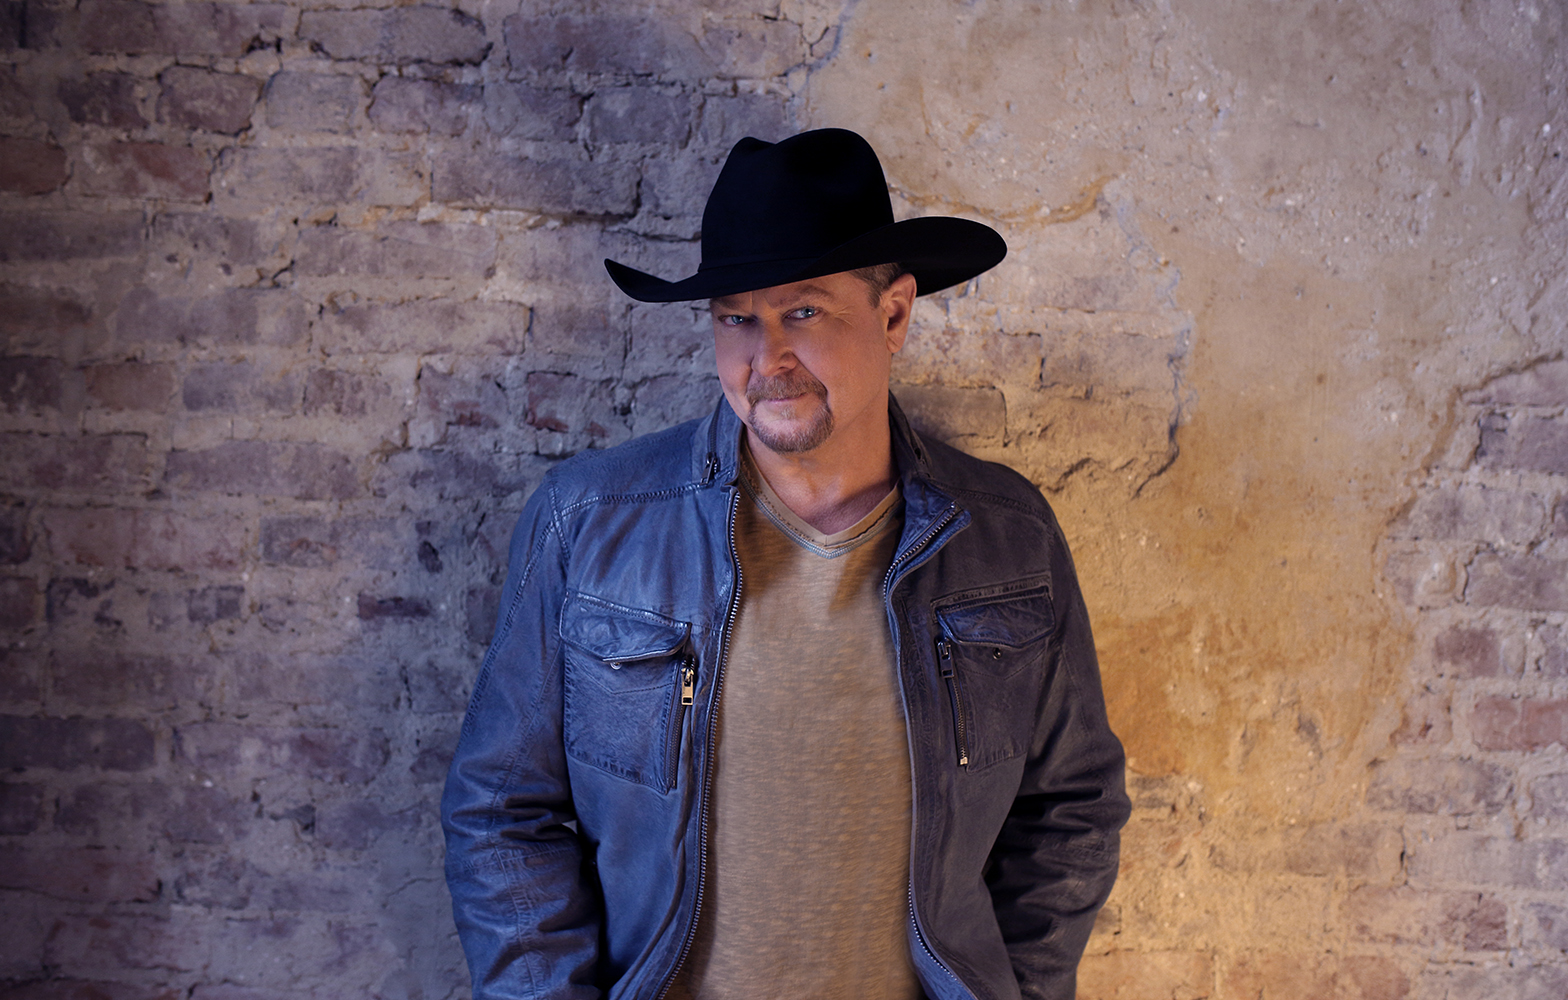 A promotional image of Tracy Lawrence, he is posing against a brick wall and is wearing a cowboy hat.